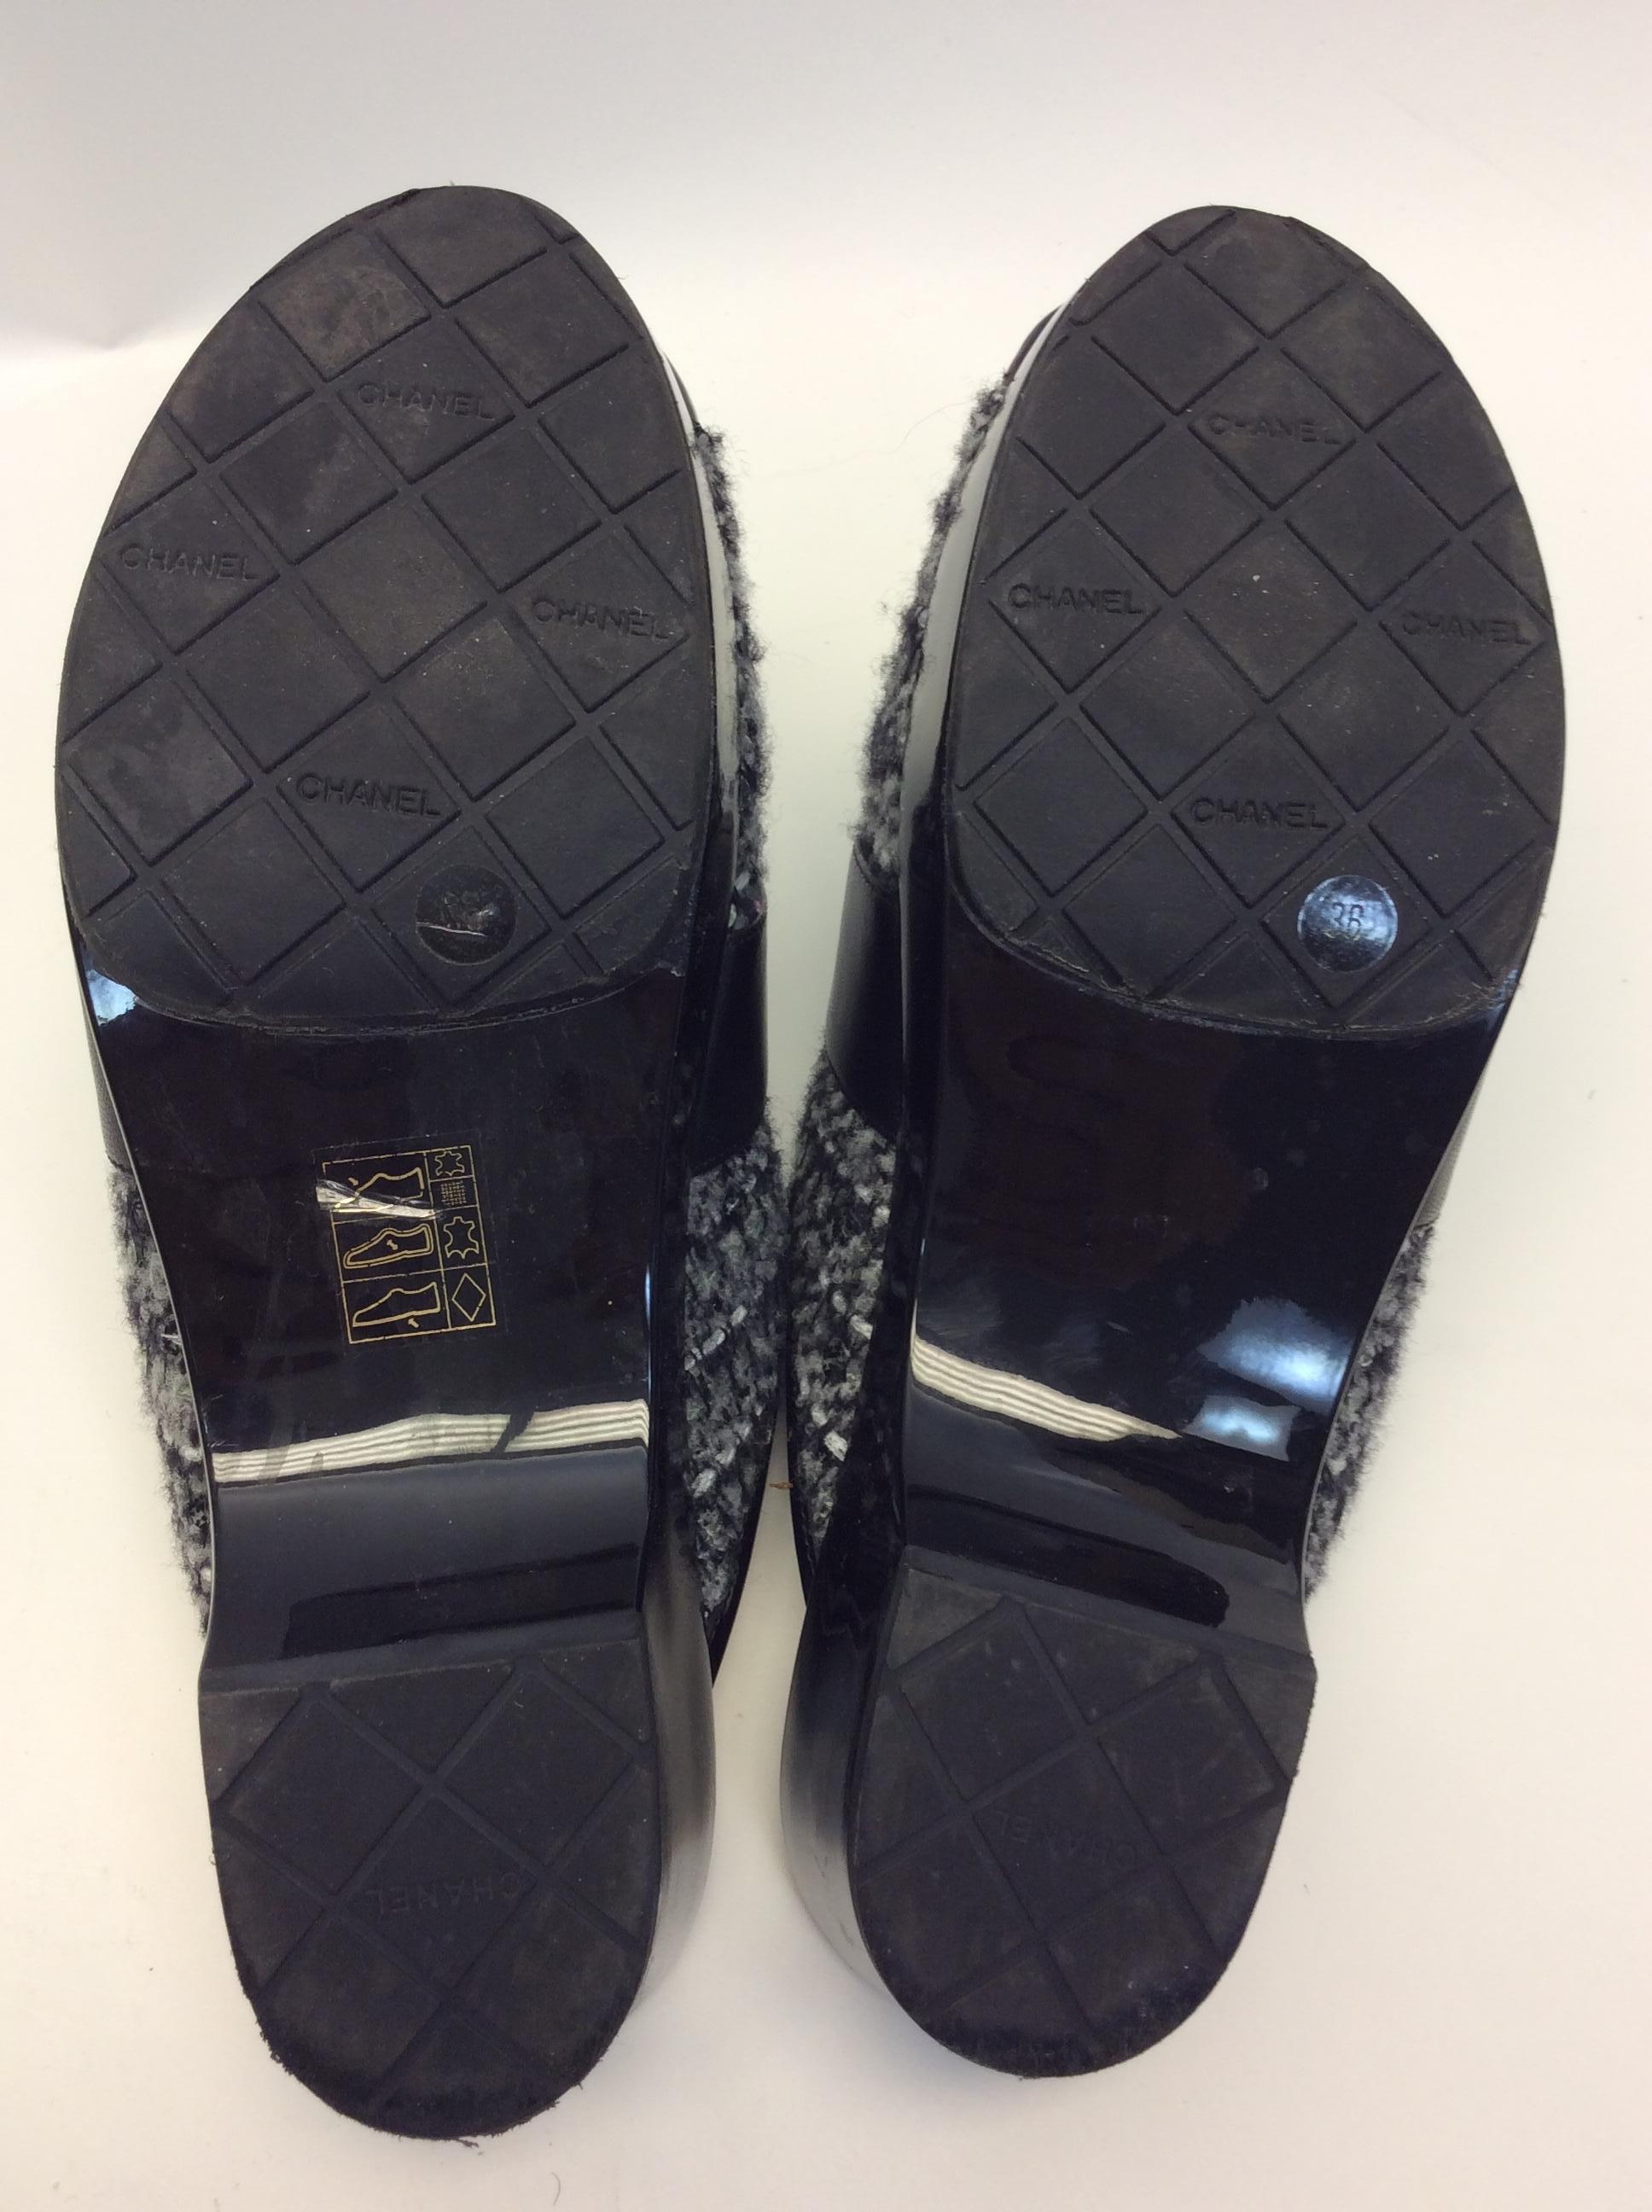 Chanel White and Black Tweed Clog For Sale 3